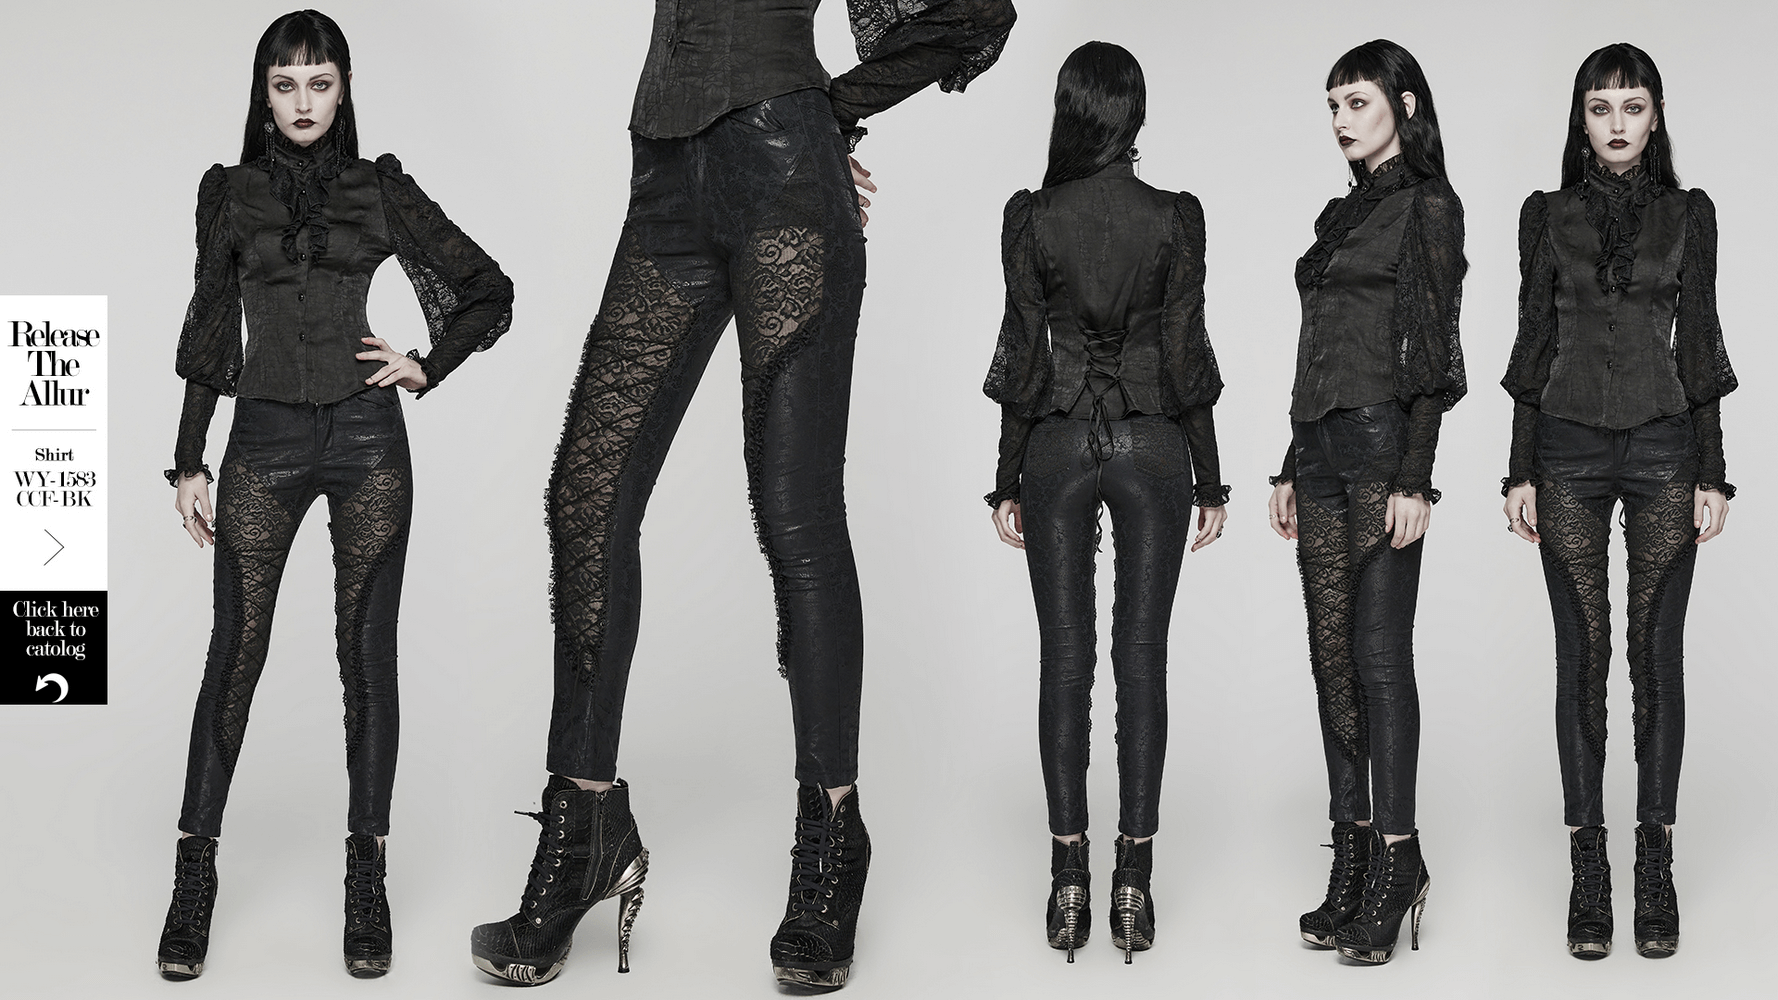 Elegant Lace and Patterned Black Leggings With Lace-Up